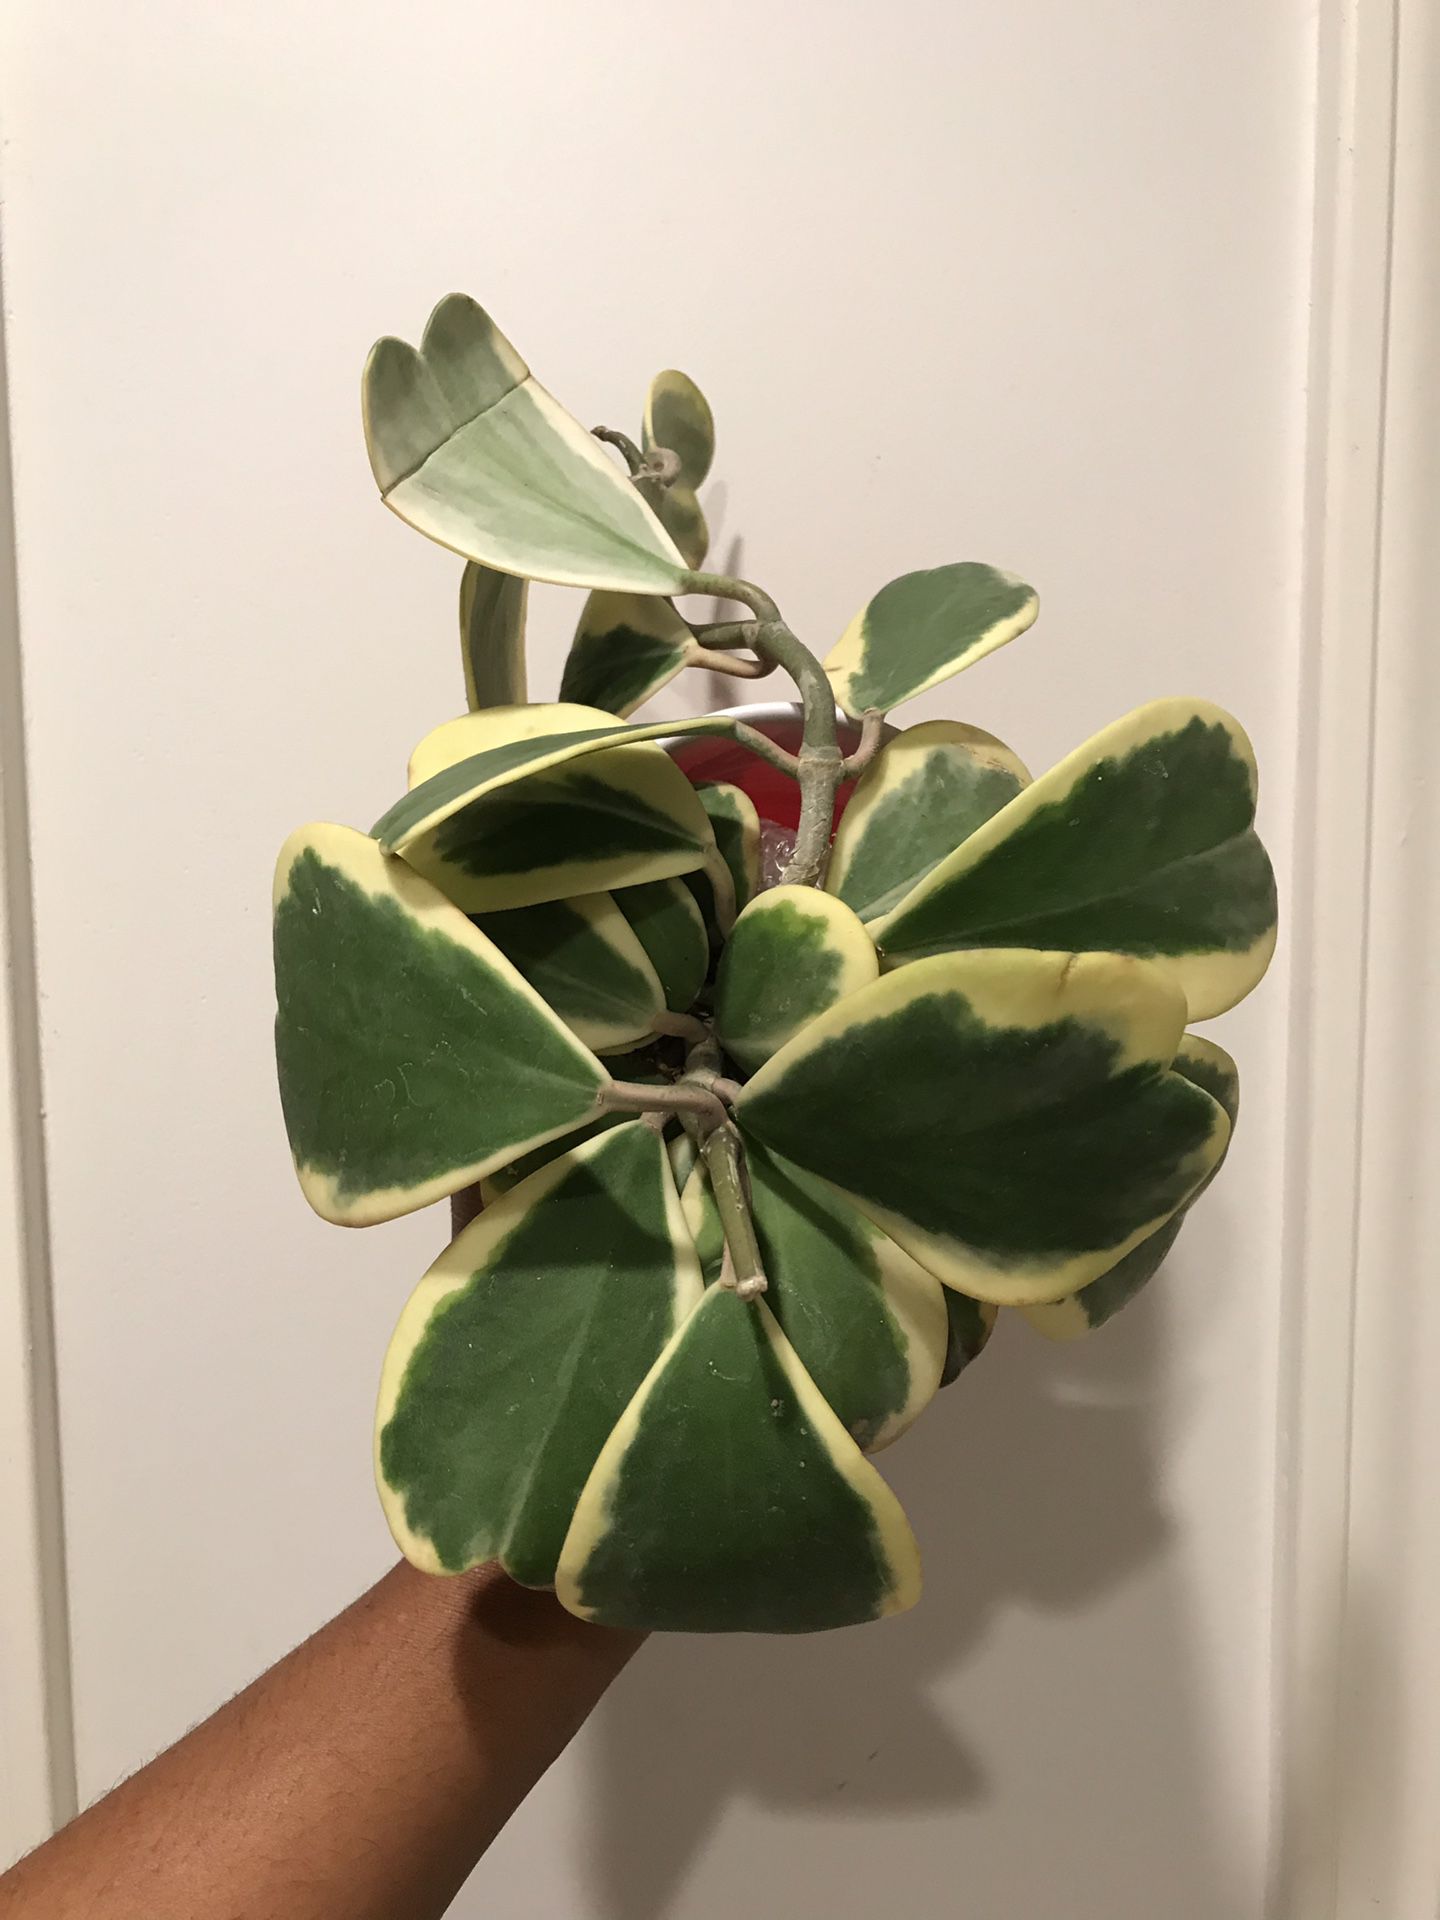 RSVP for A. Chase... Rare Variegated Hoya Kerrii Houseplant